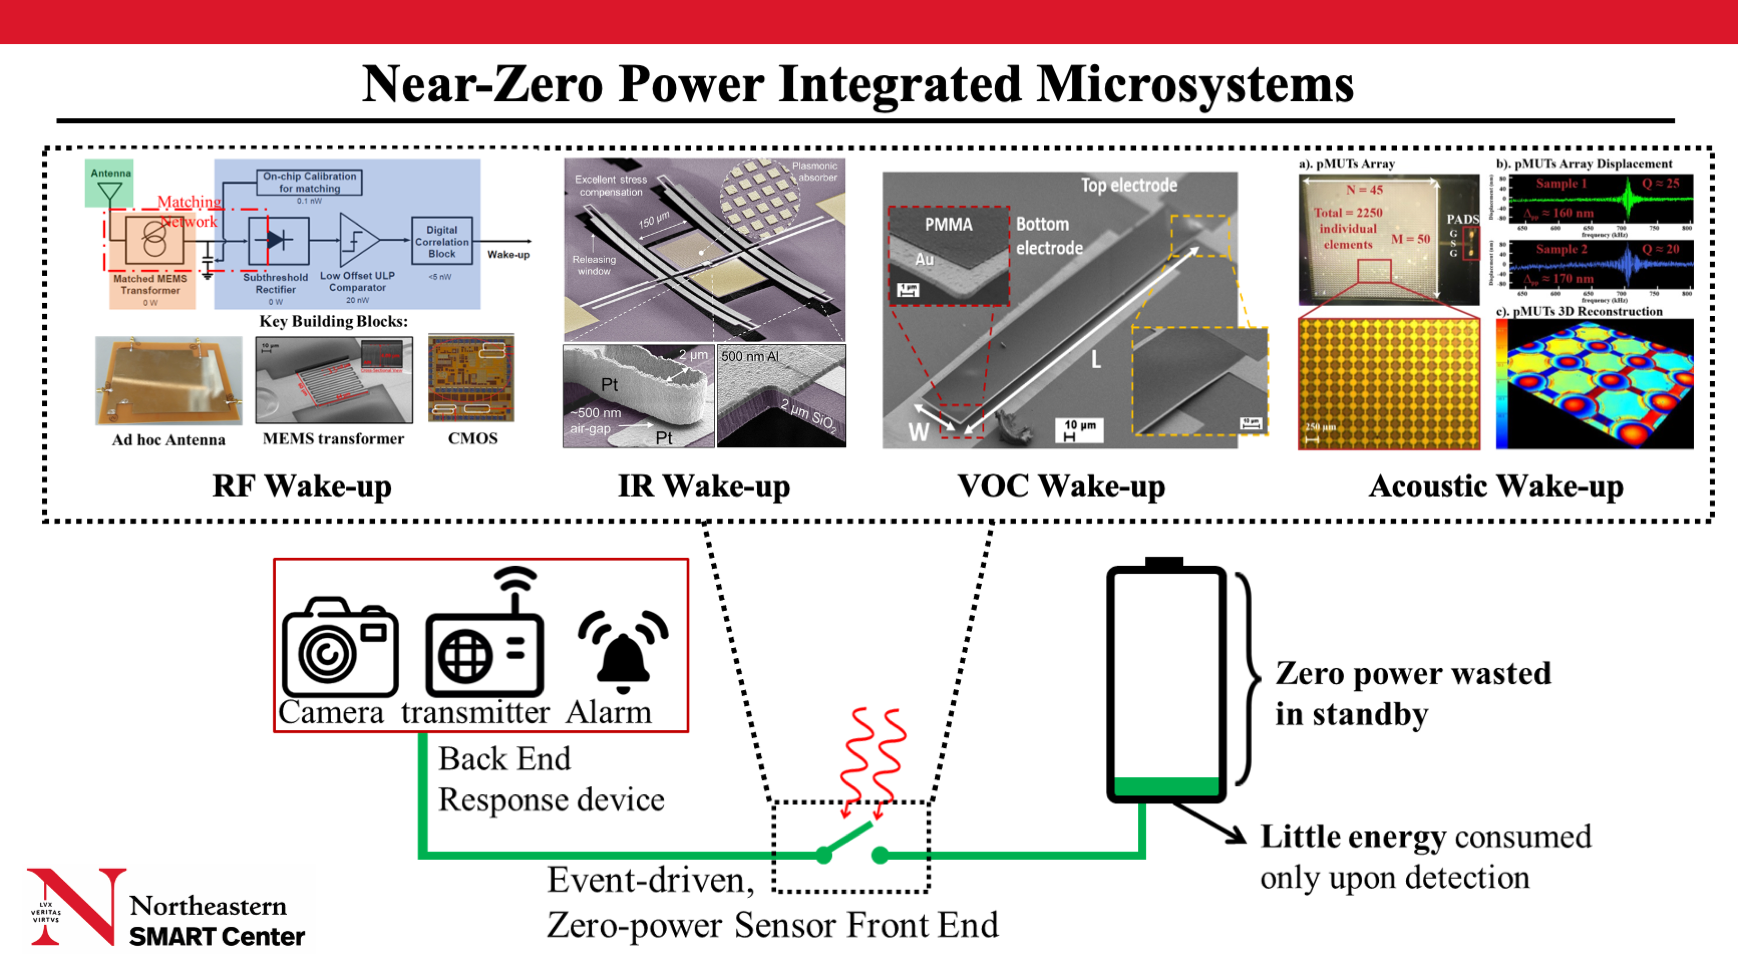 Near-zero power integrated microsystems for the IoT